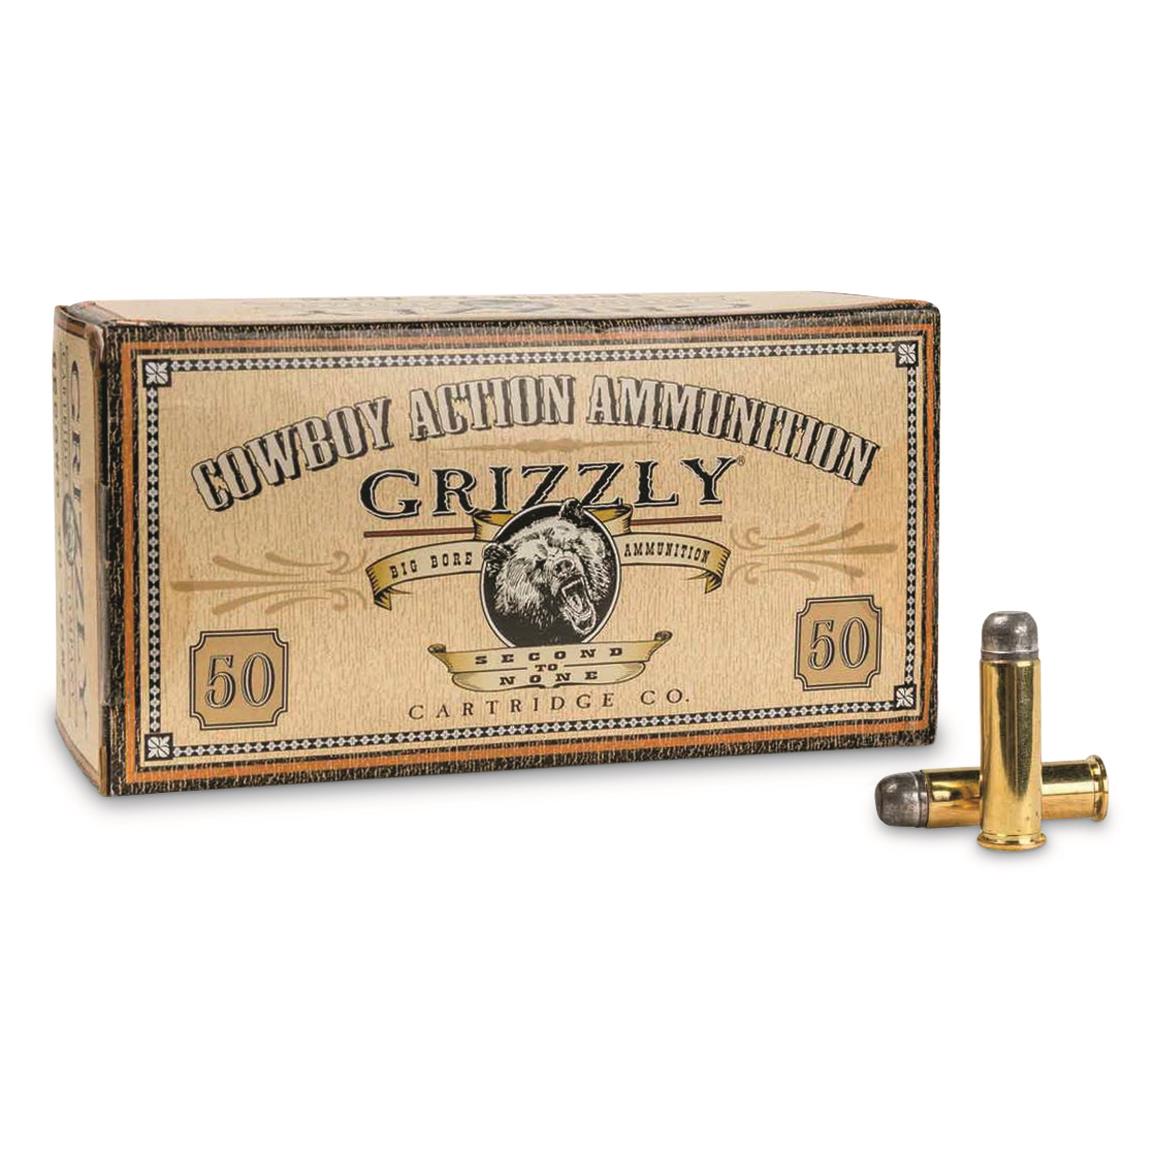 Grizzly Cartridge Co. Cowboy Action Ammo, .357 Magnum, RNFP, 158 Grain, 50 Rounds